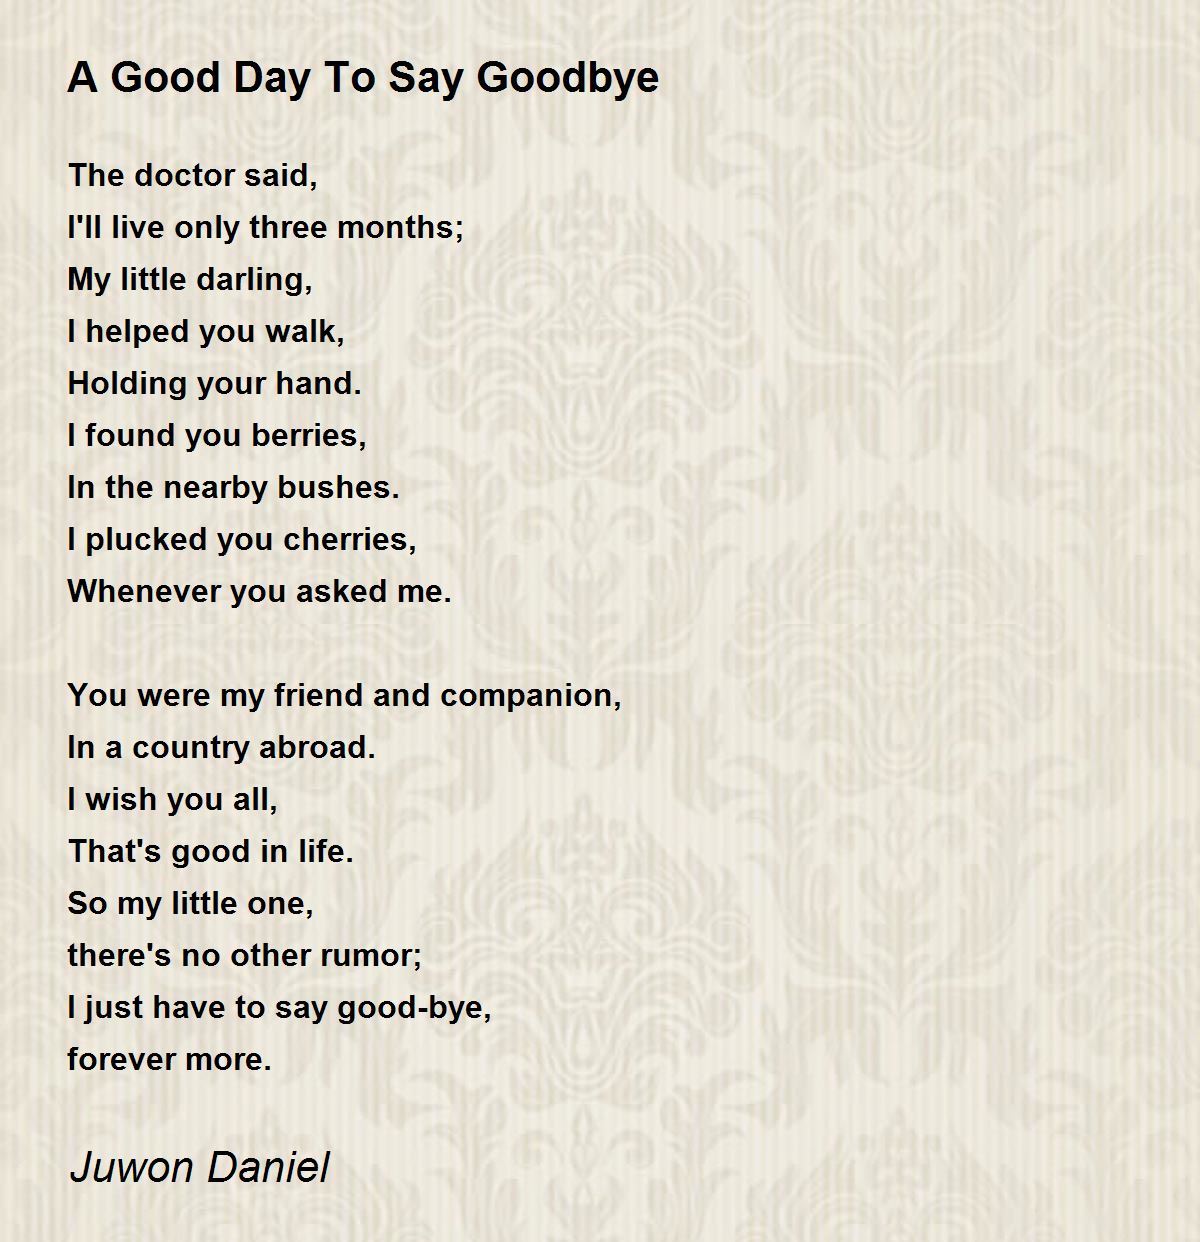 A Good Day To Say Goodbye - A Good Day To Say Goodbye Poem by ...